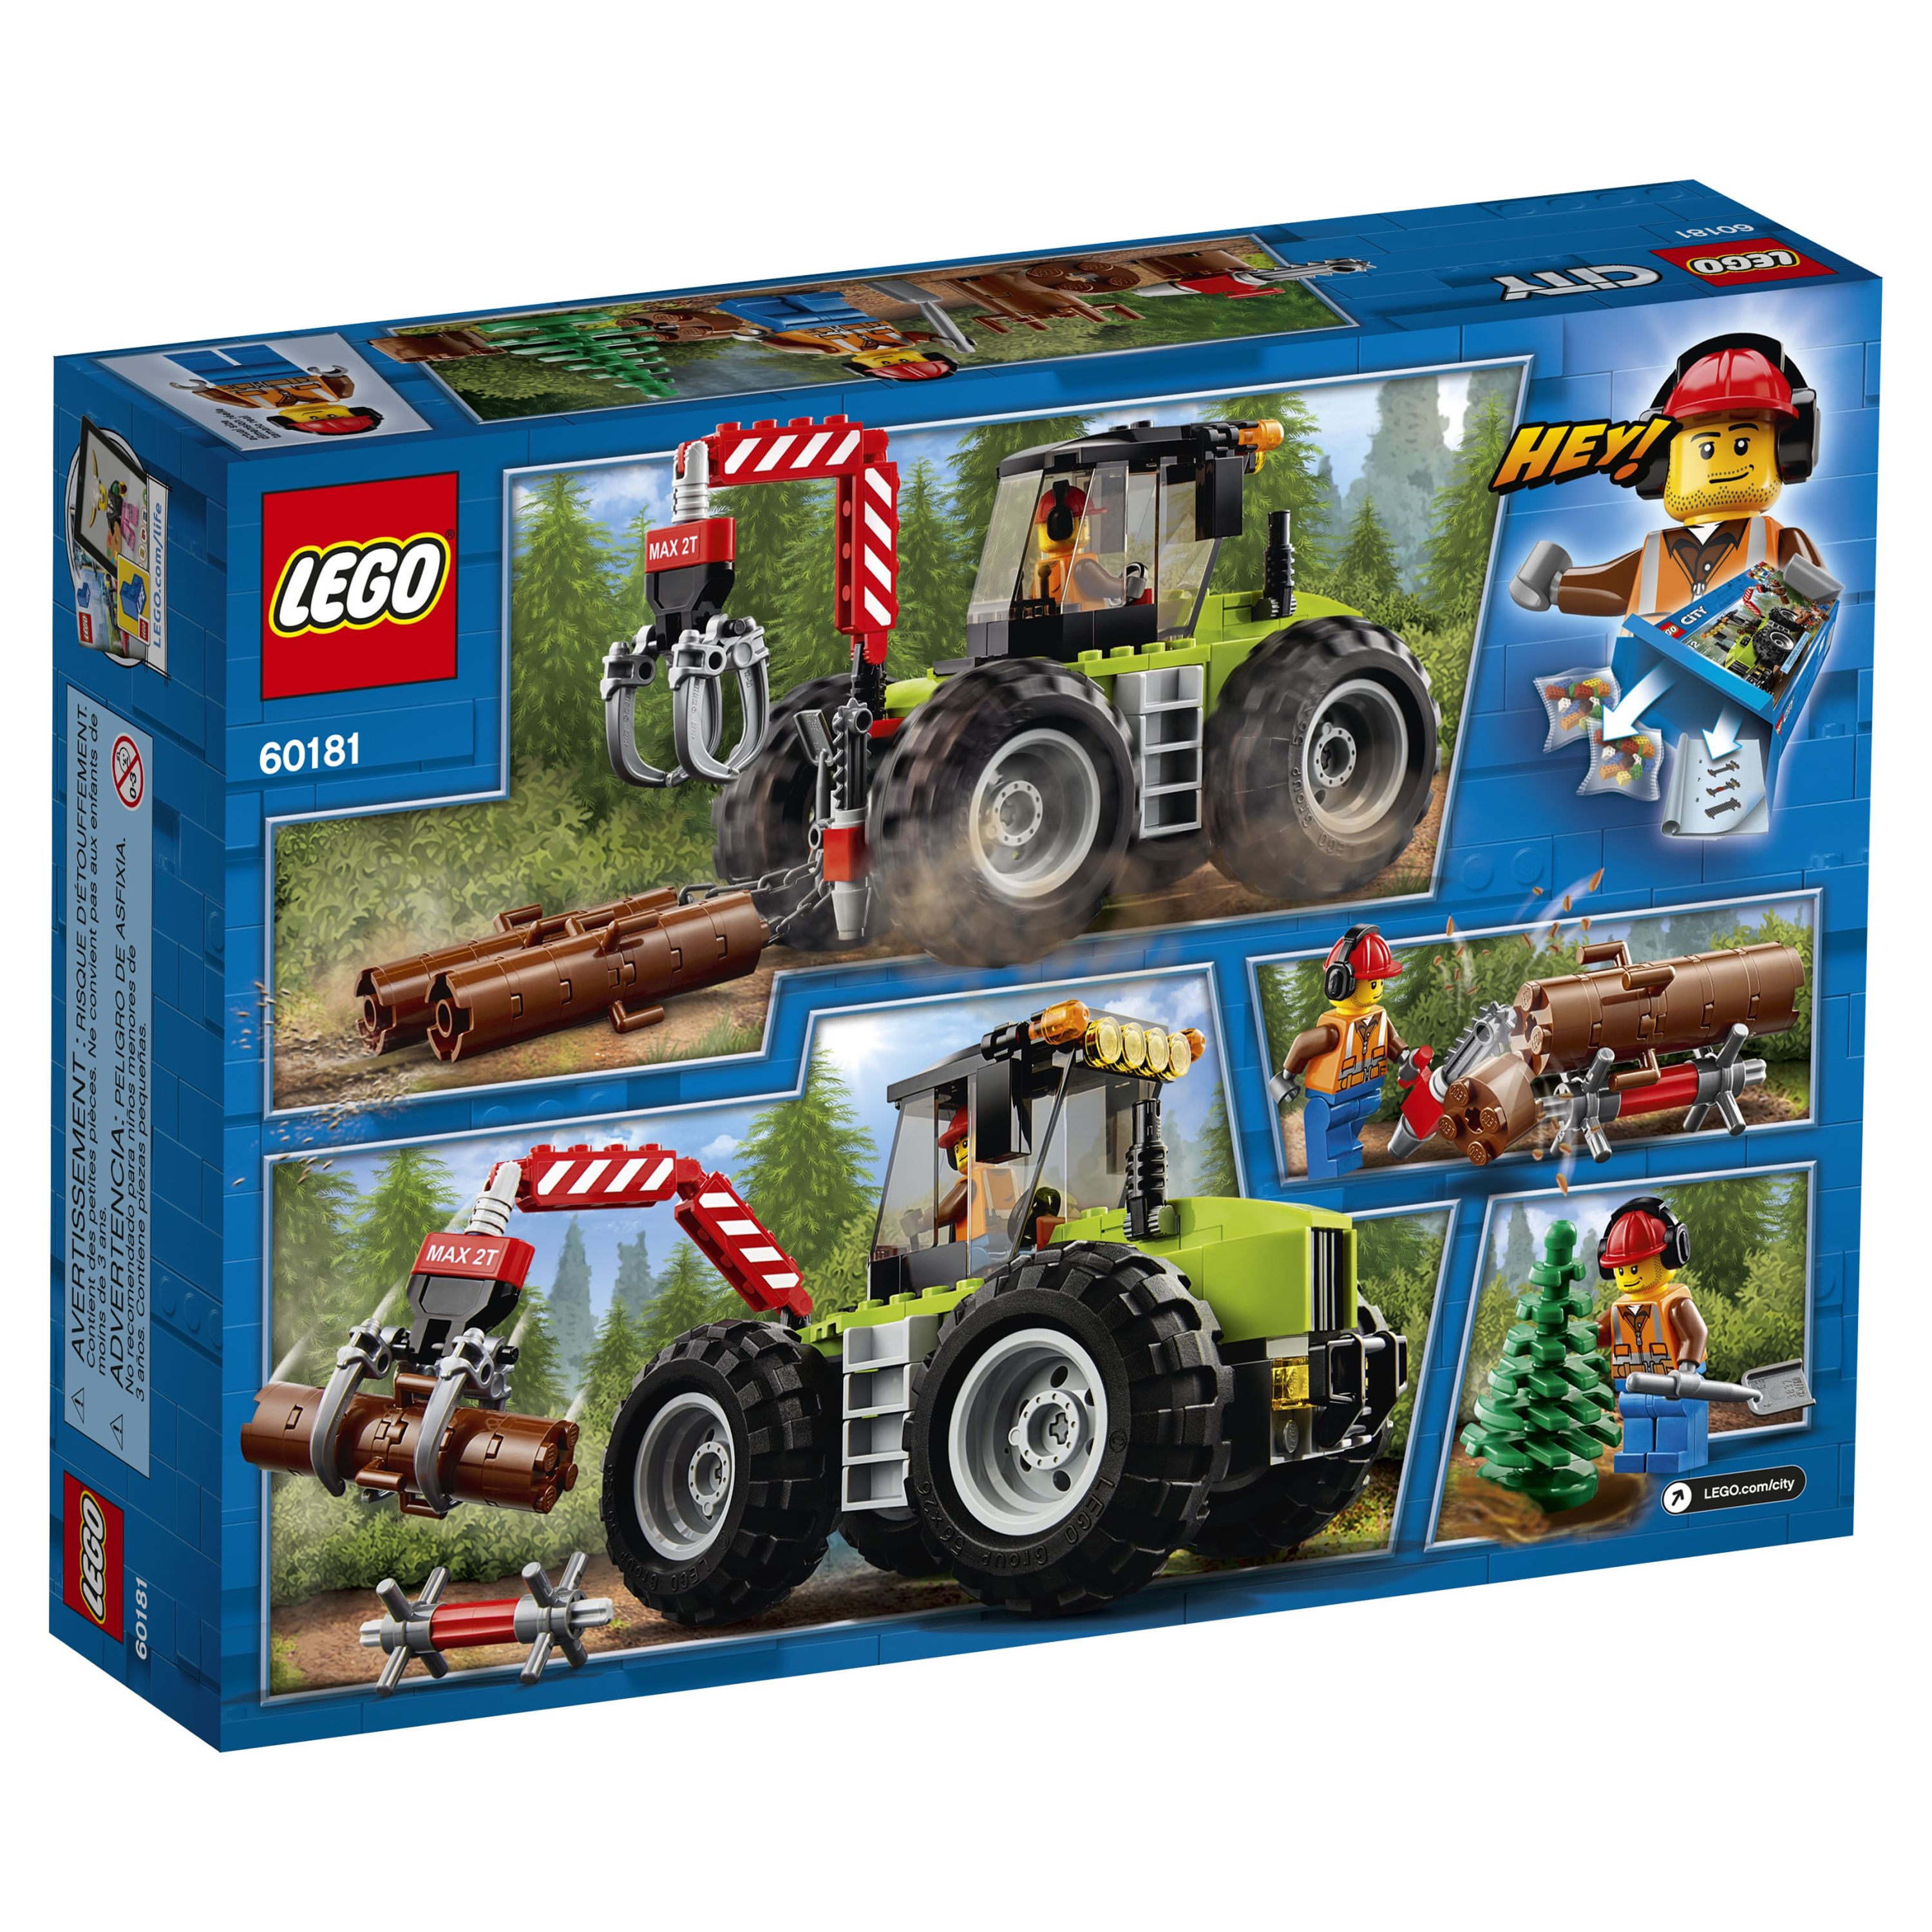 LEGO City Great Vehicles Forest Tractor 60181 - image 5 of 5